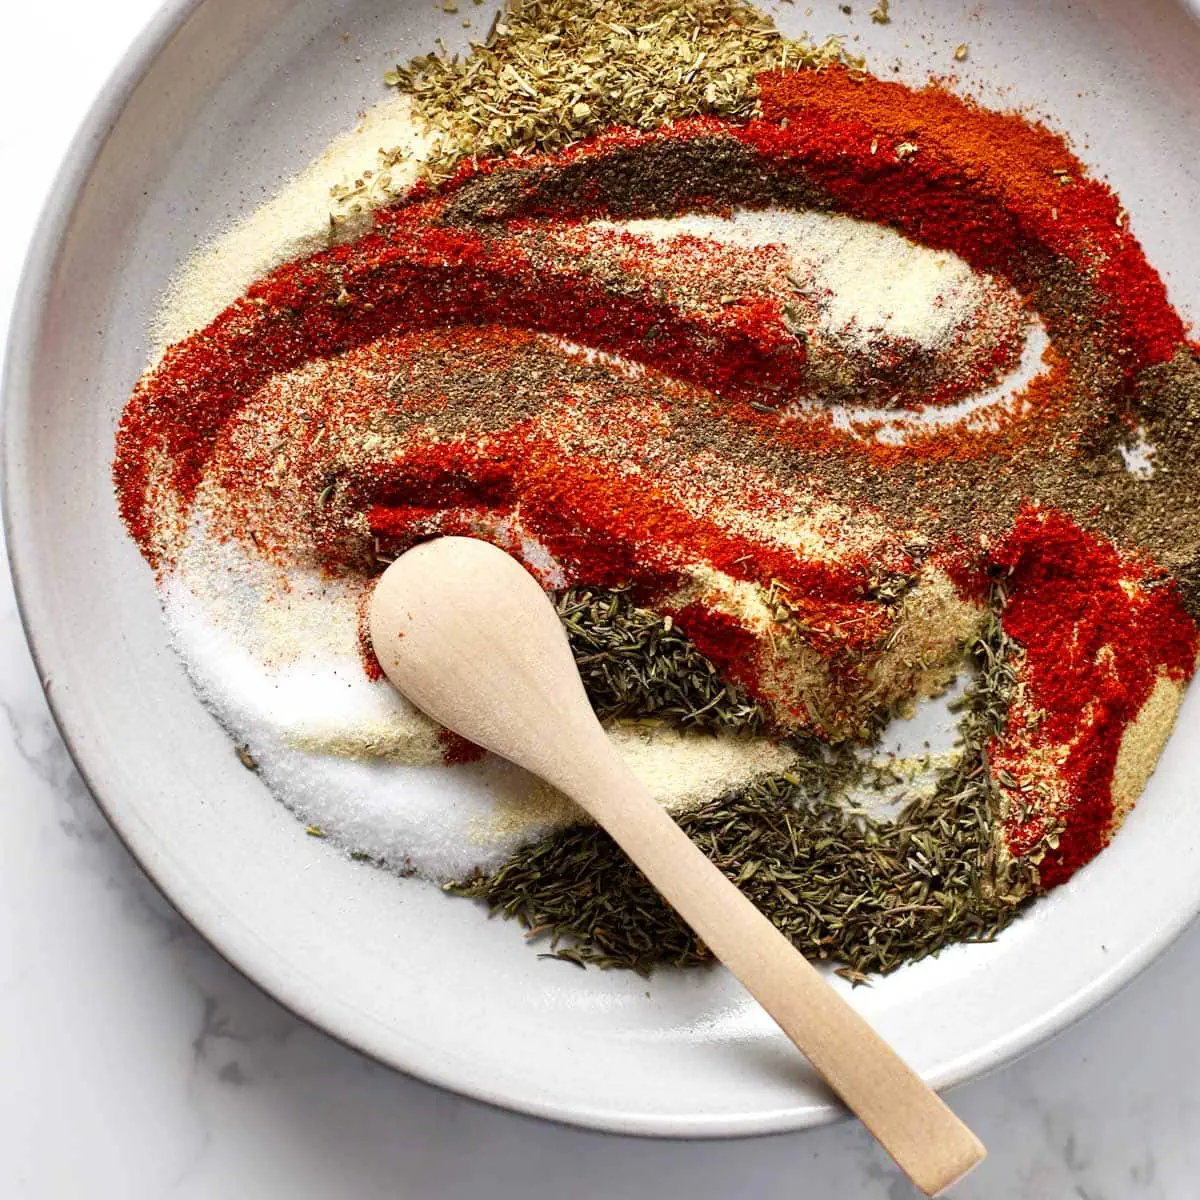 Cajun seasoning spices swirled together on a plate.